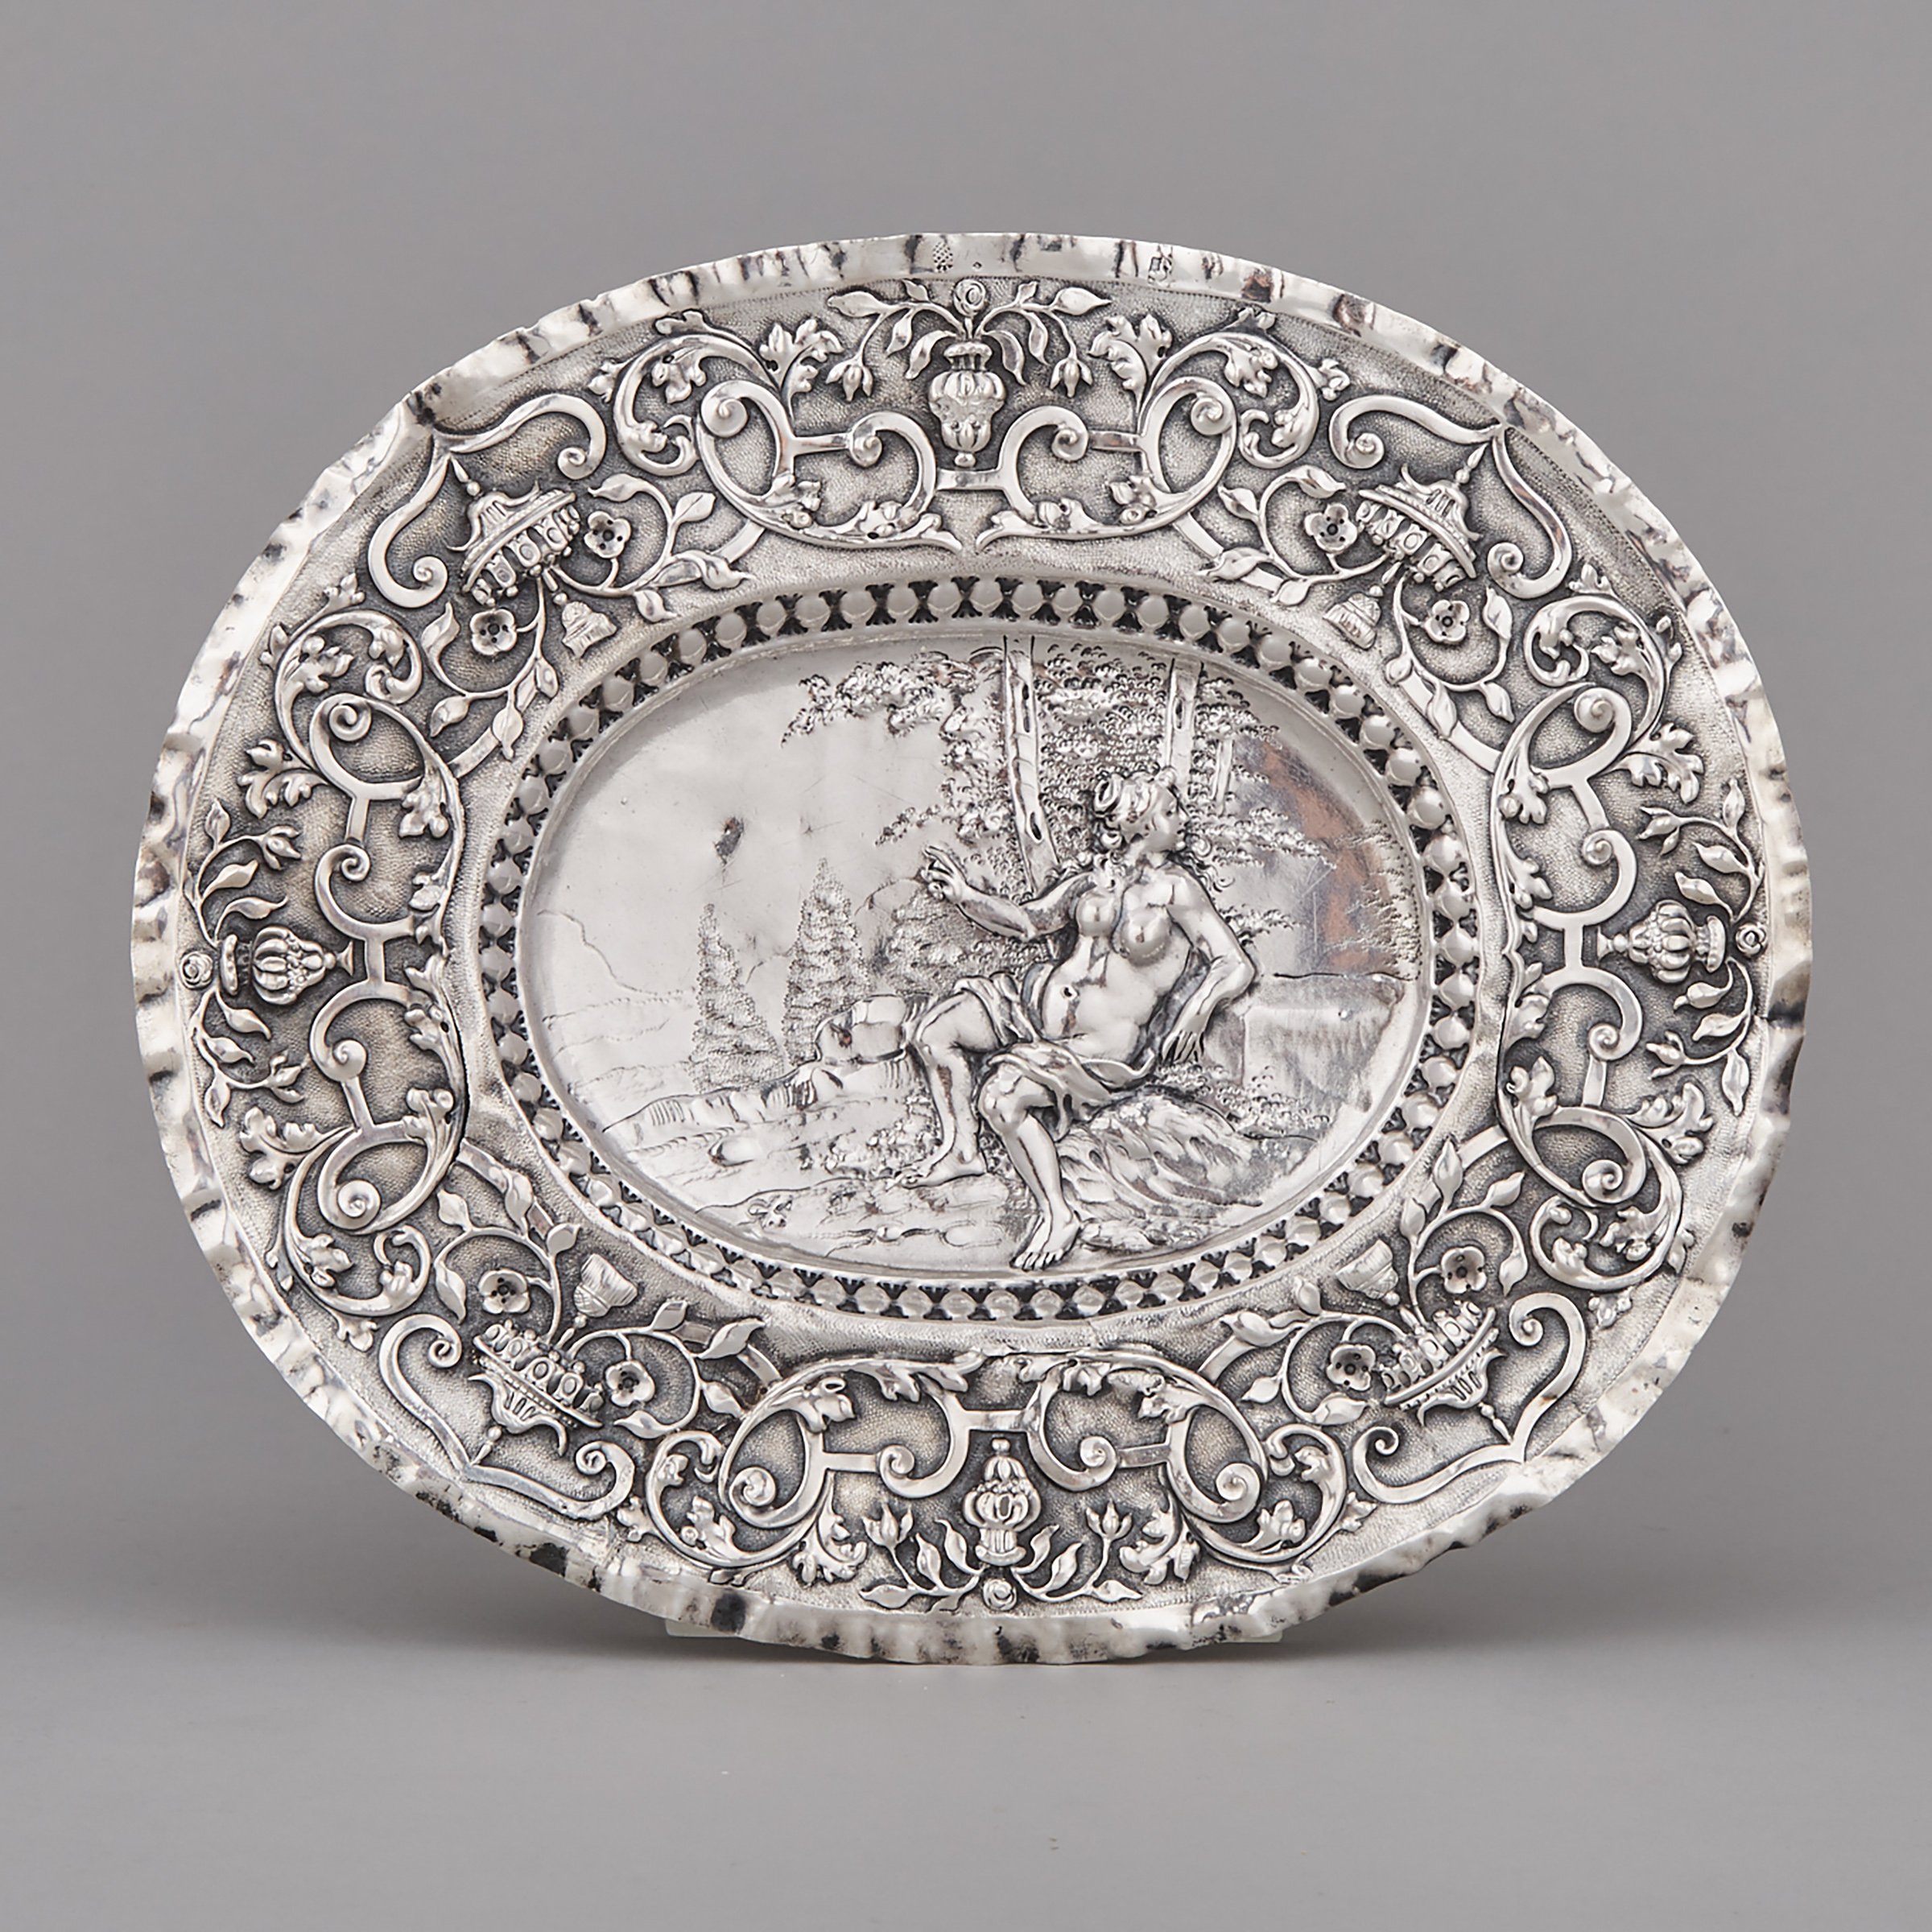 German Silver Oval Dish, Anton Grill, Augsburg, late 17th century